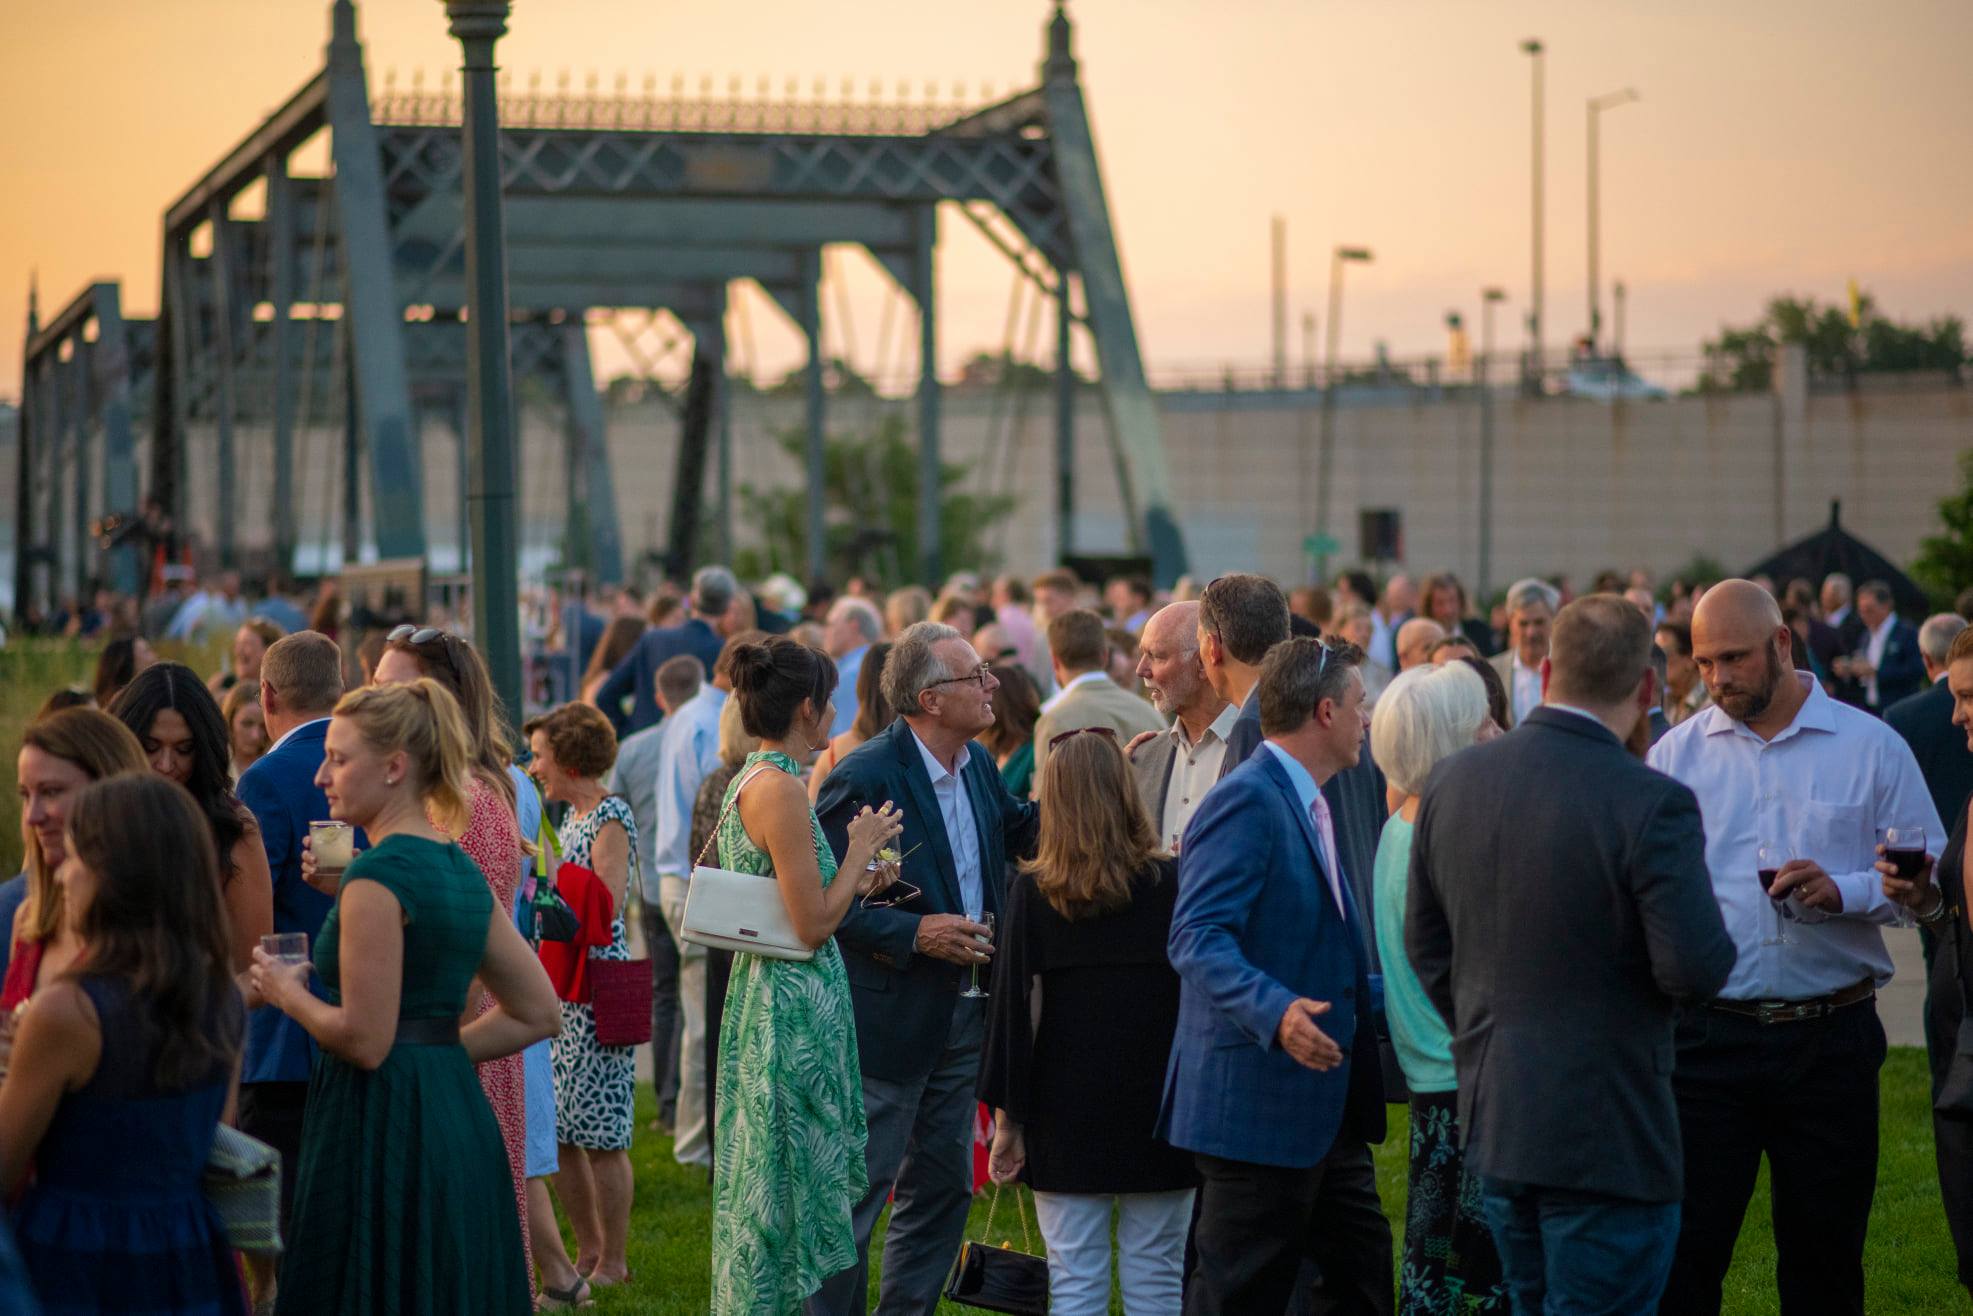 Guests at Gala on the Bridge enjoy the beautiful park atmosphere by the historic 19th Street Bridge.